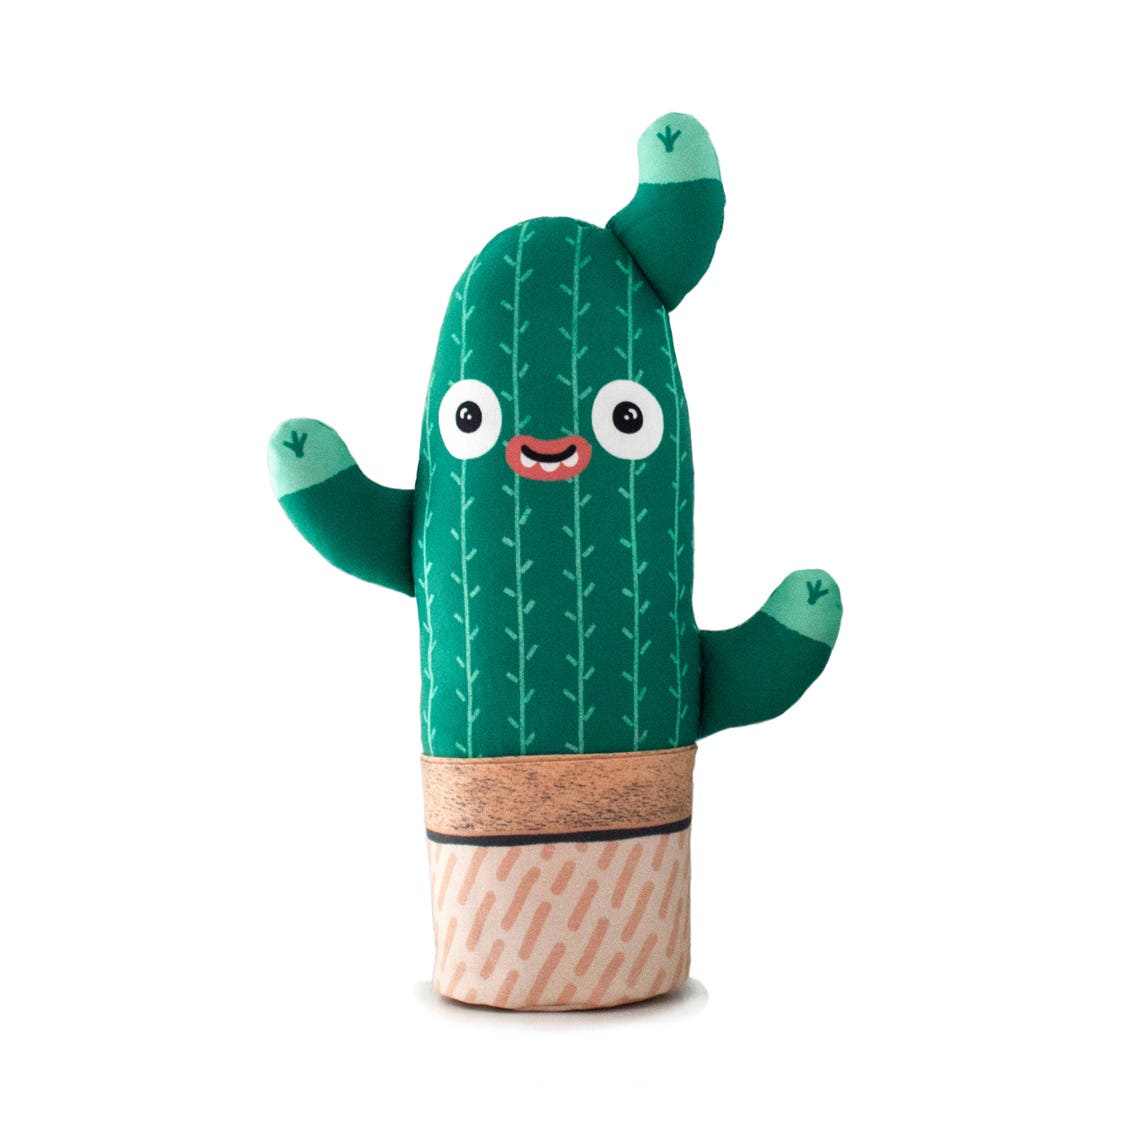 The Cacti Lovers Soft Plant Handmade Toy Cactus Plush Doll - Etsy